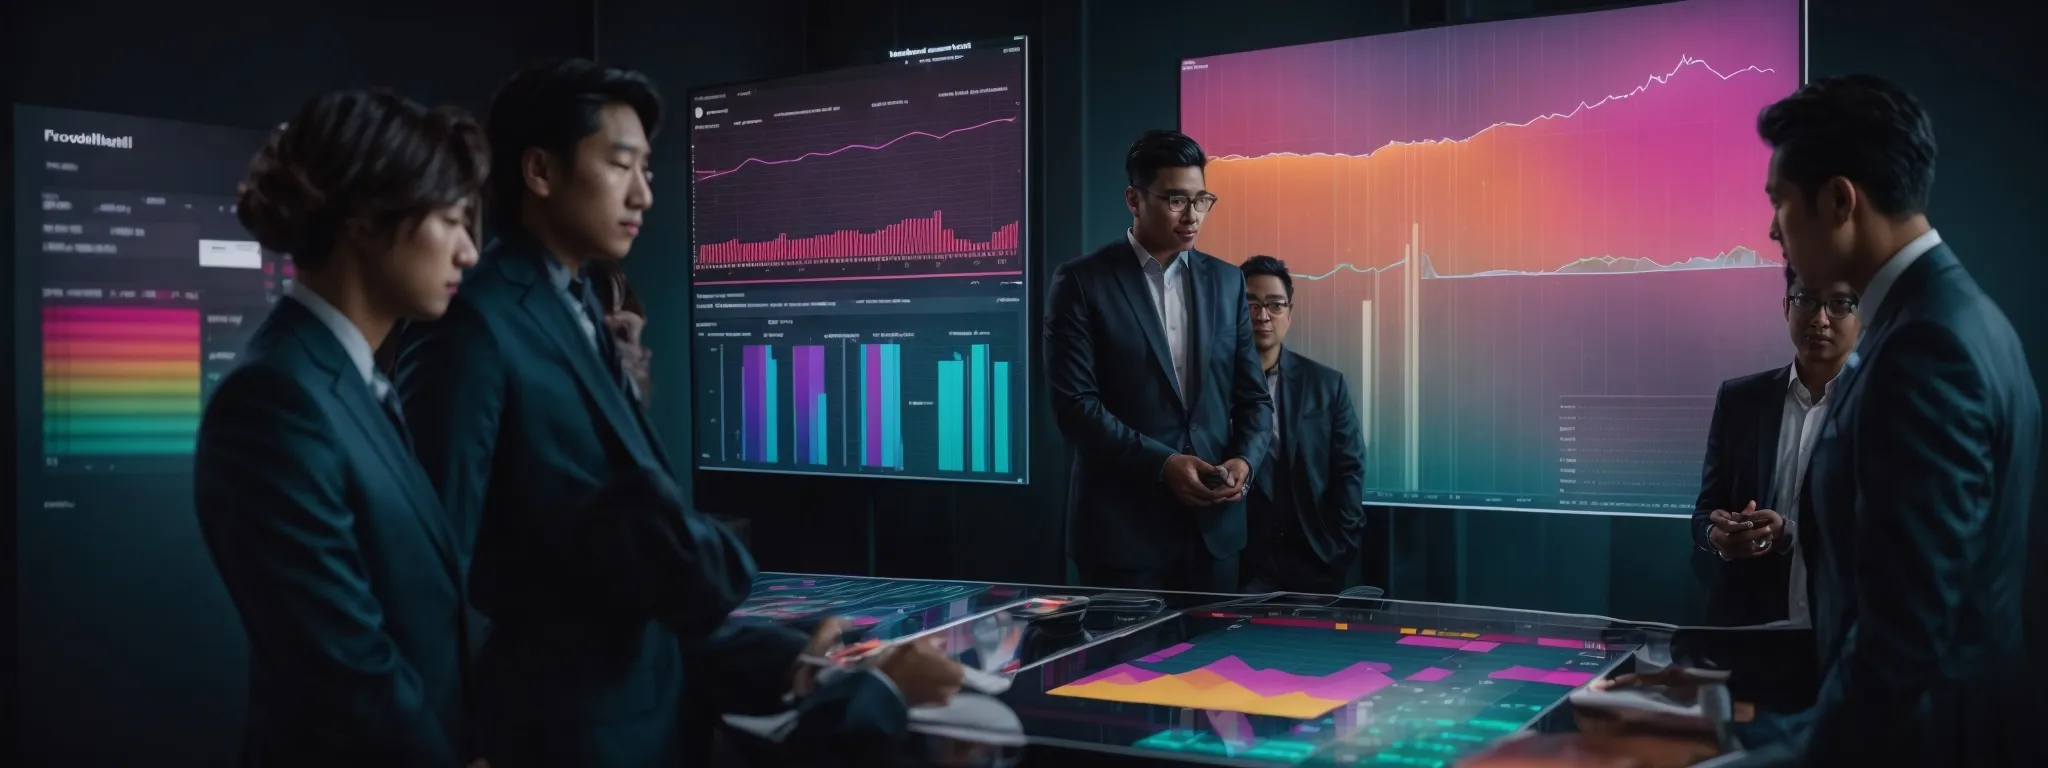 a group of professionals gathered around a modern touchscreen display showing colorful graphs and sales forecast models.